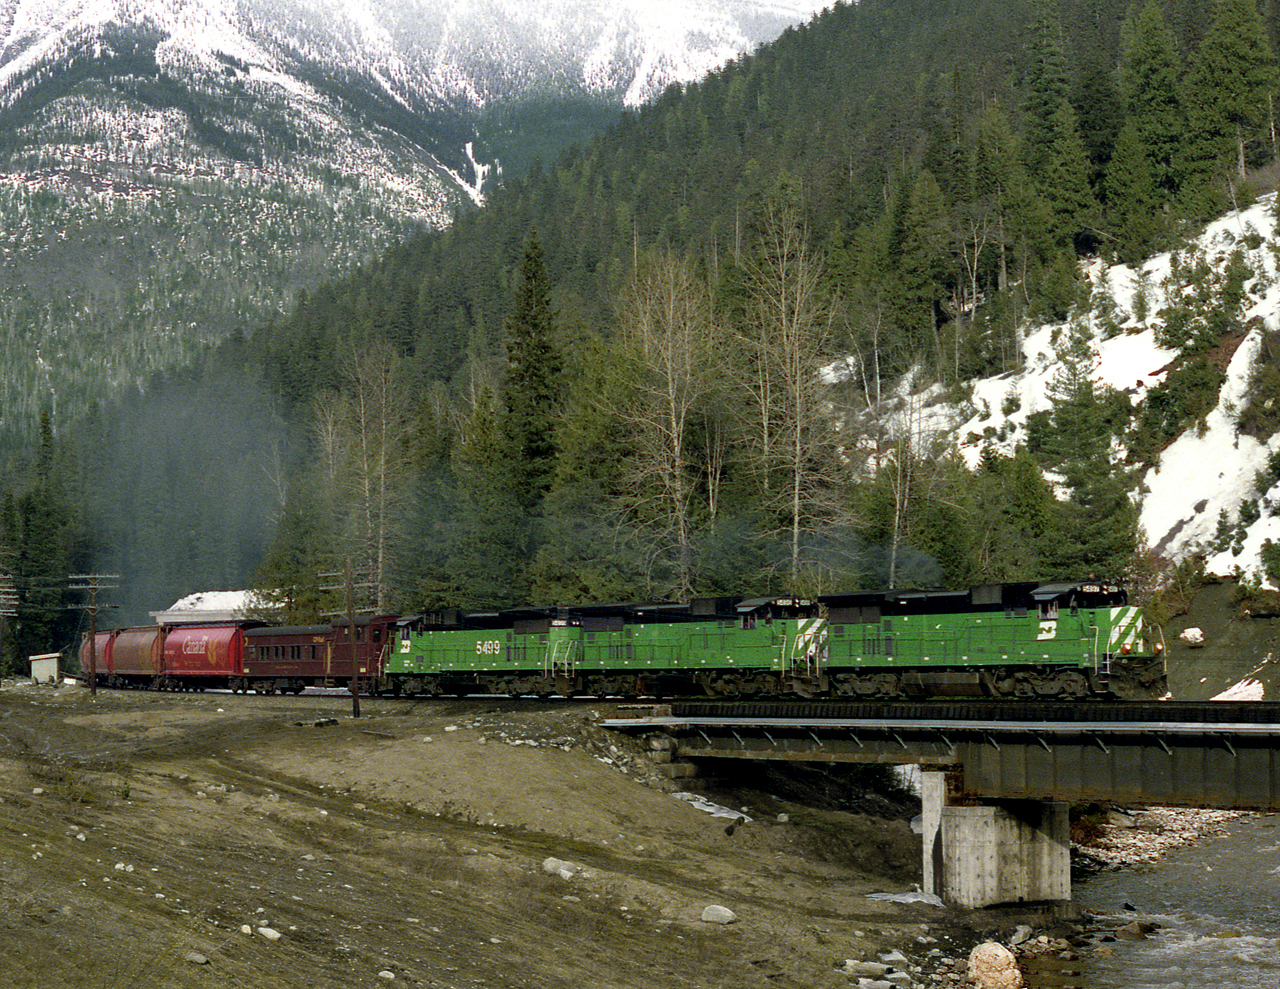 CP was considering buying GE power. During a test a trio of GE Built BN Dash 8's with dynamometer car in tow descends the west slope of Rogers Pass.